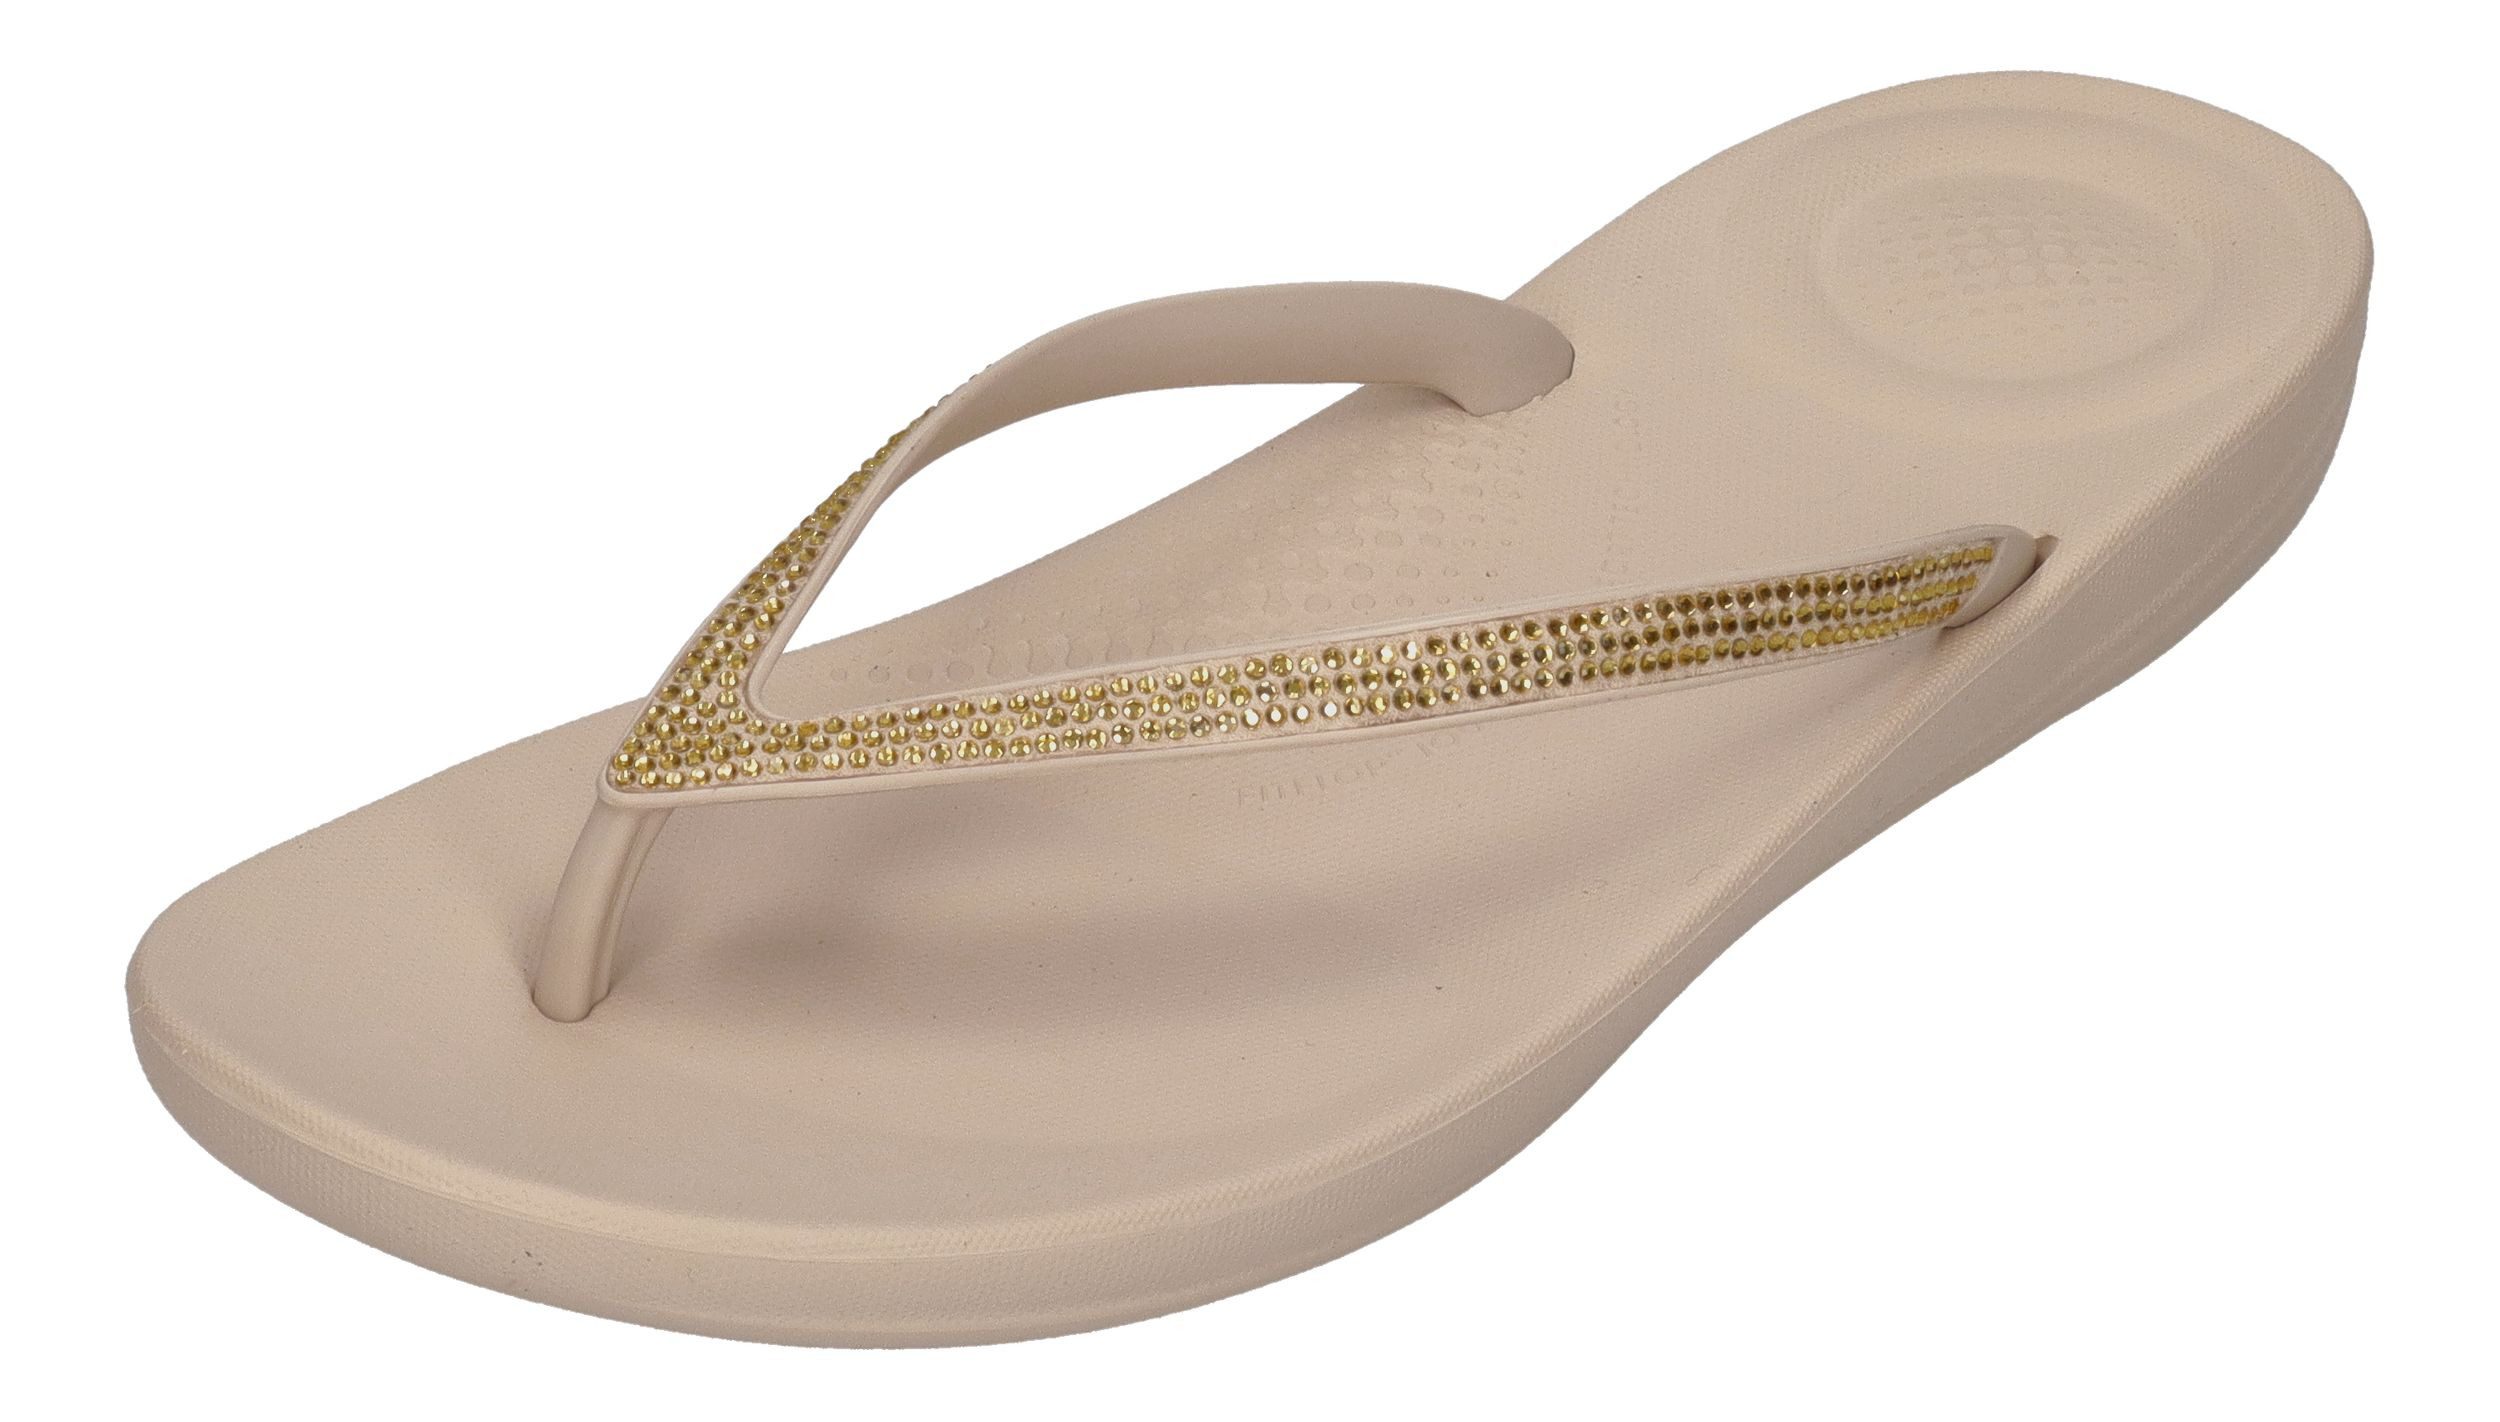 Fitflop IQUSHION SPARKLE Zehentrenner stone beige